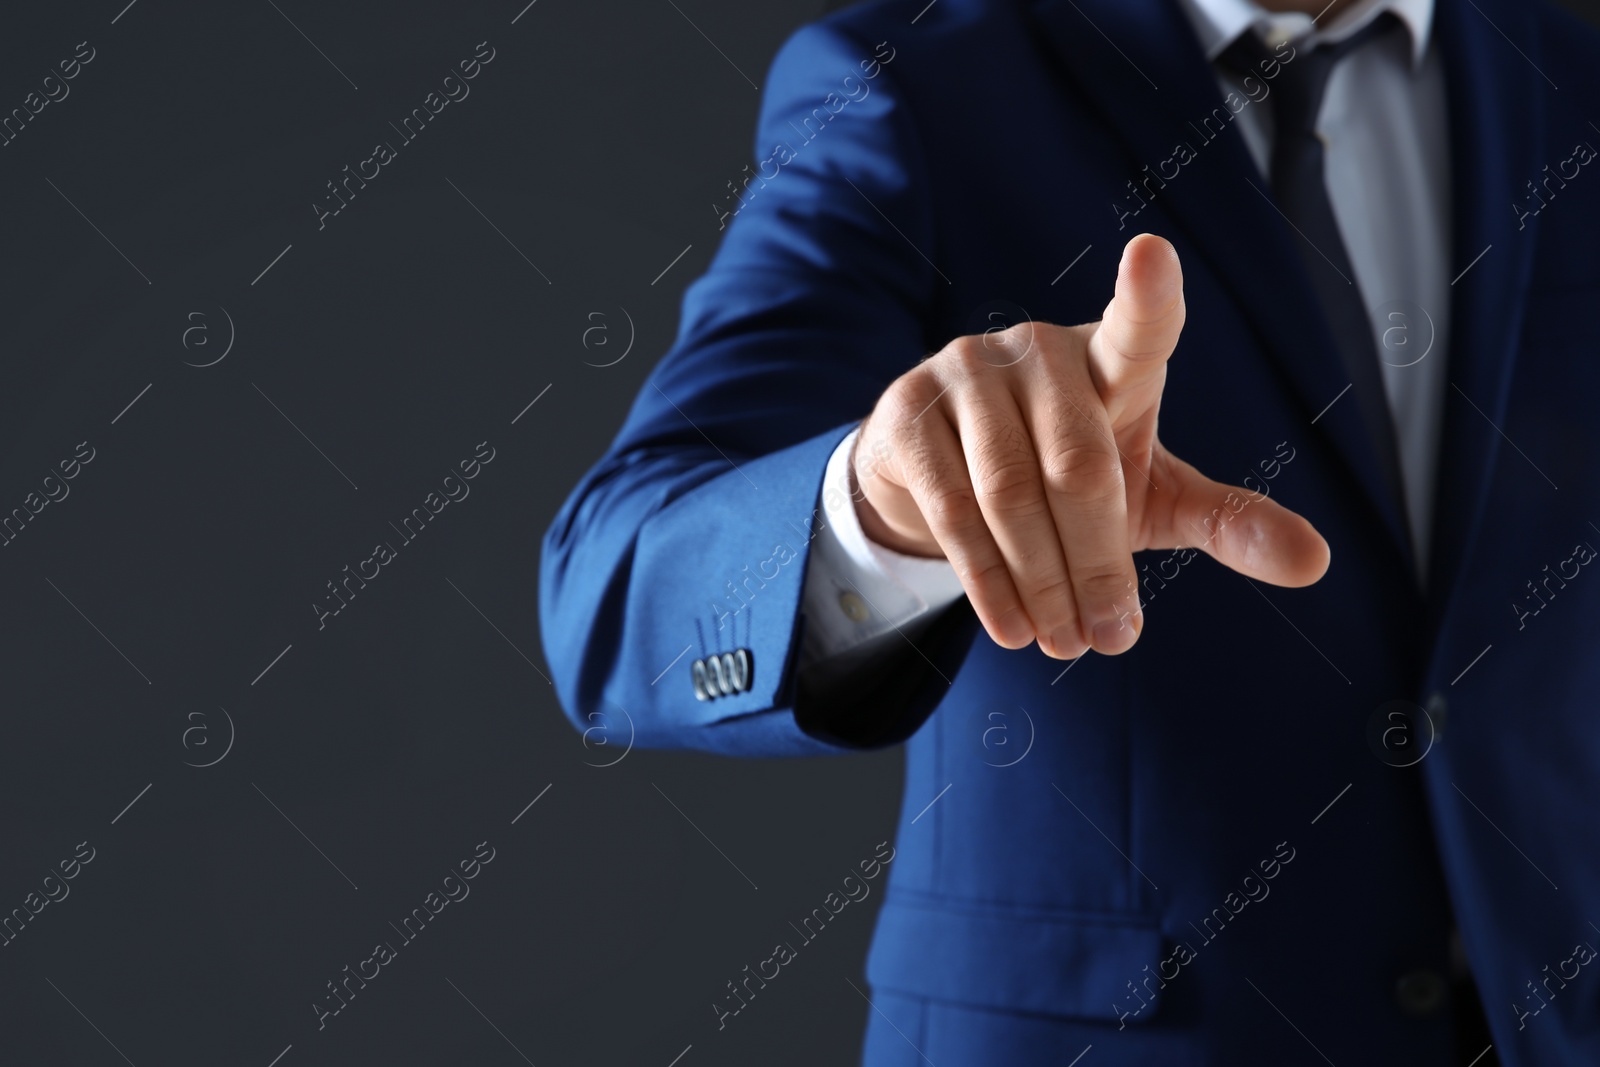 Photo of Businessman touching empty virtual screen against dark background, focus on hand